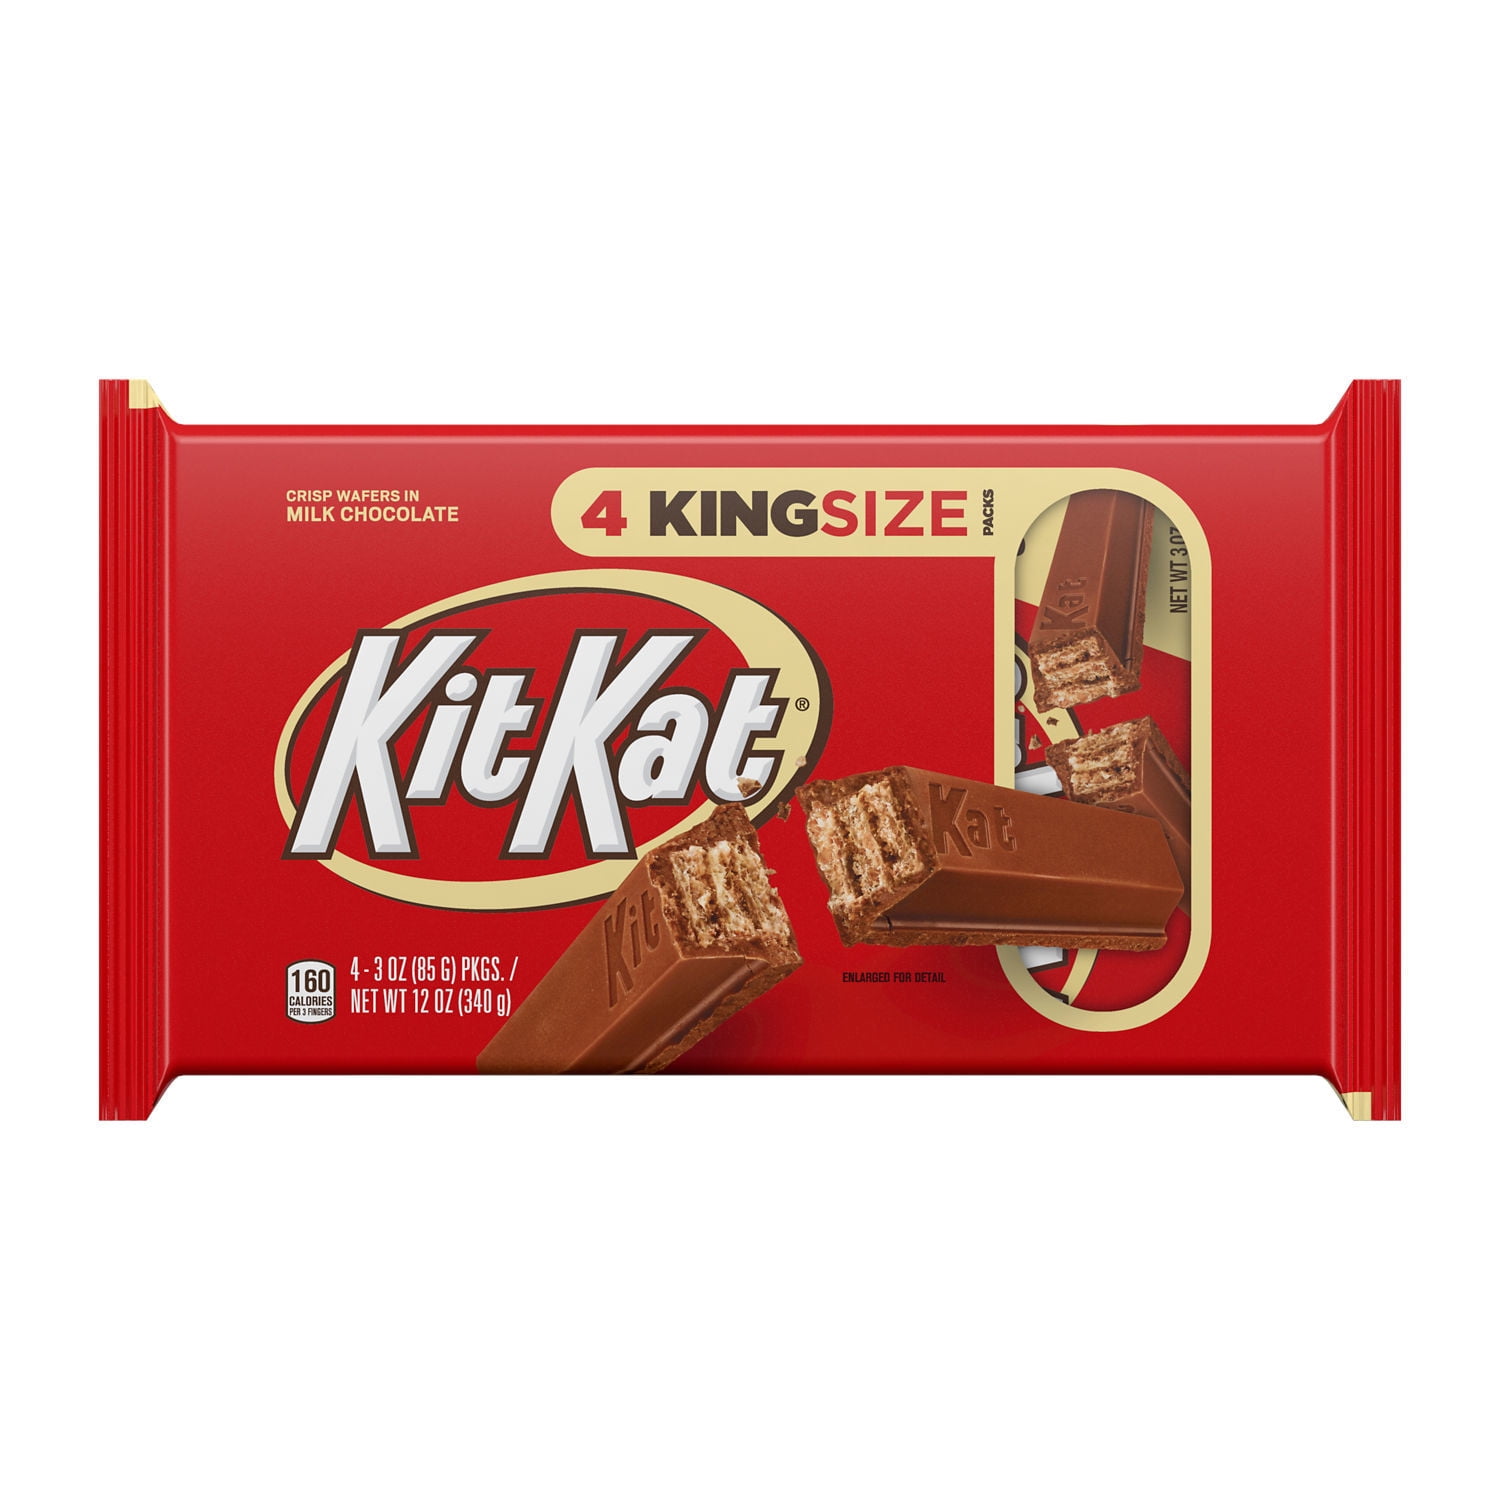 Kit Kat Chocolate Frosted Donut Candy Bar - 24ct Display Box